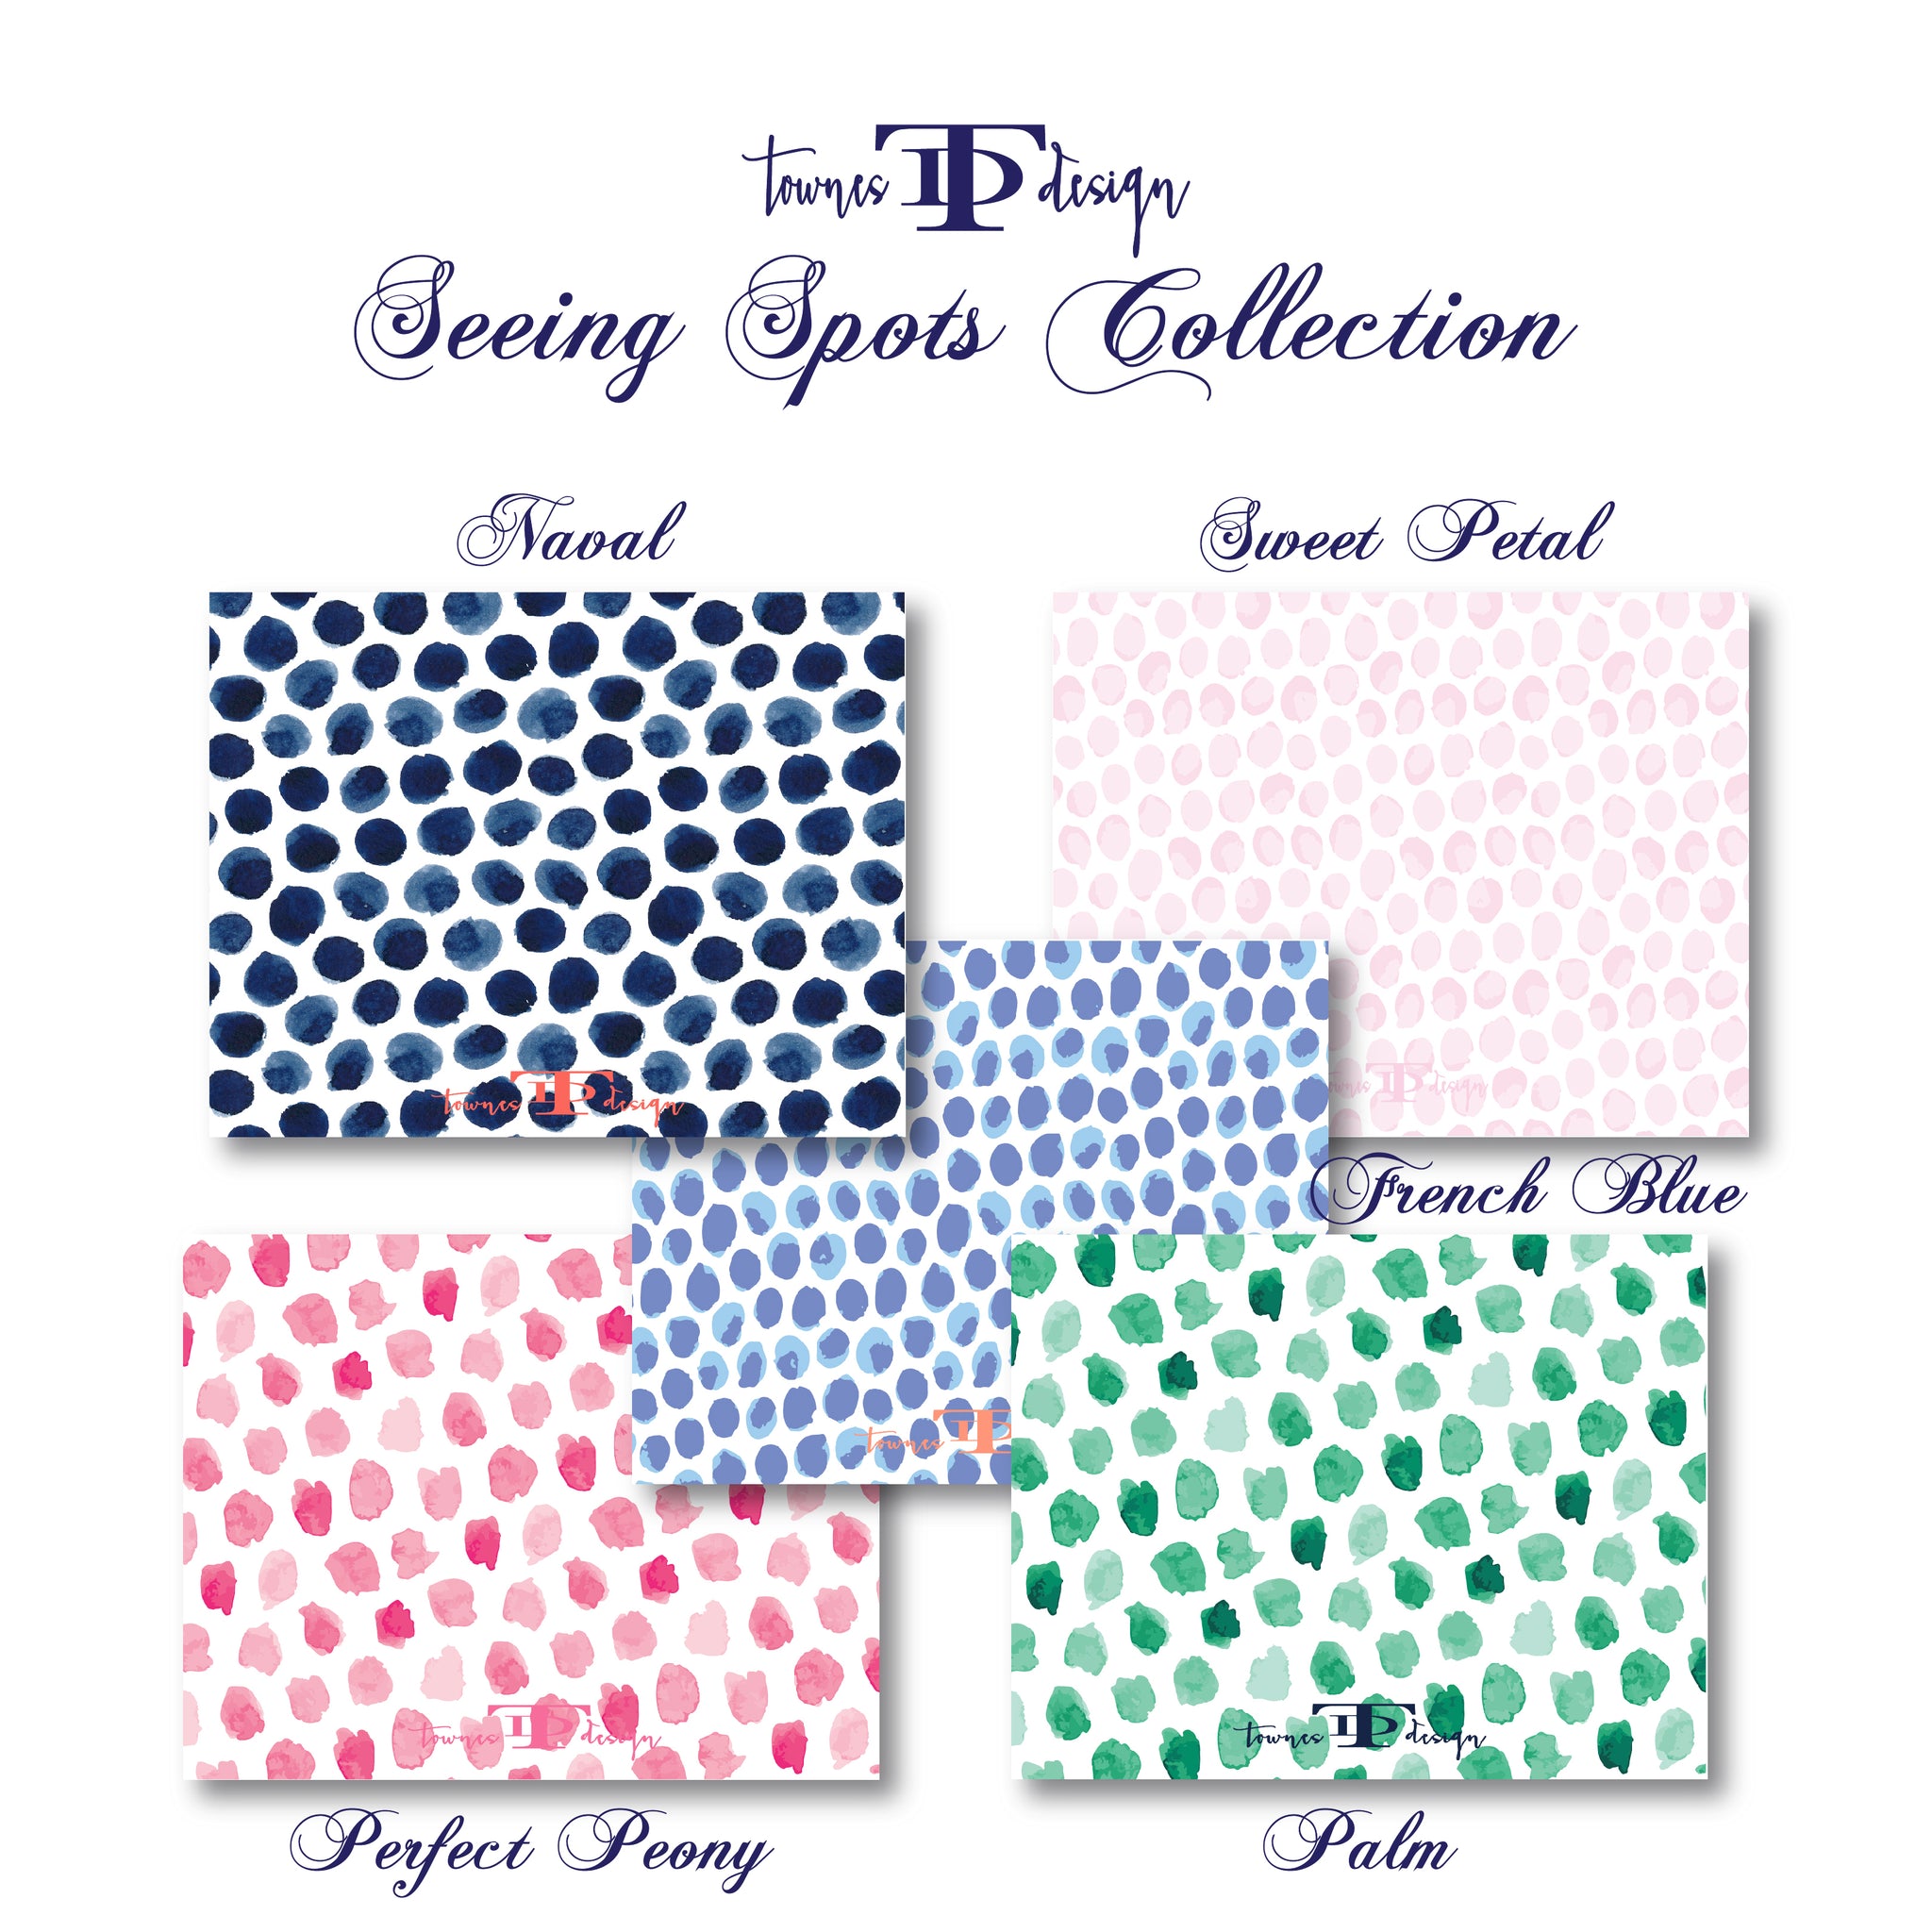 Seeing Spots Classic Collections Note Set